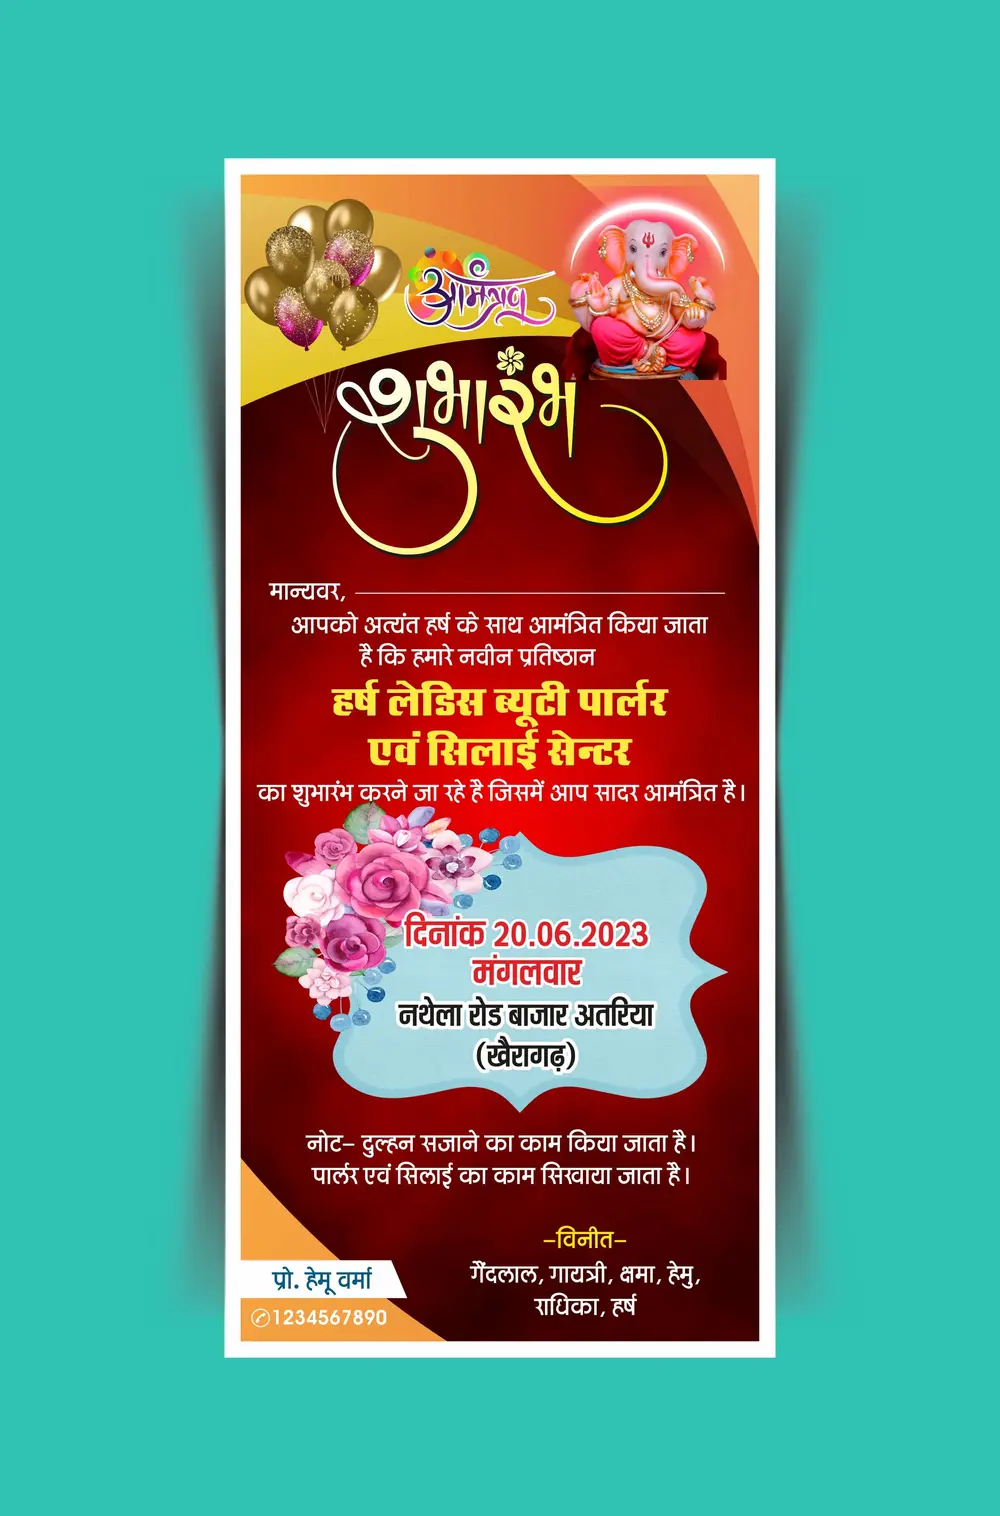 Beauty parlour and silai center opening invitation card 200623